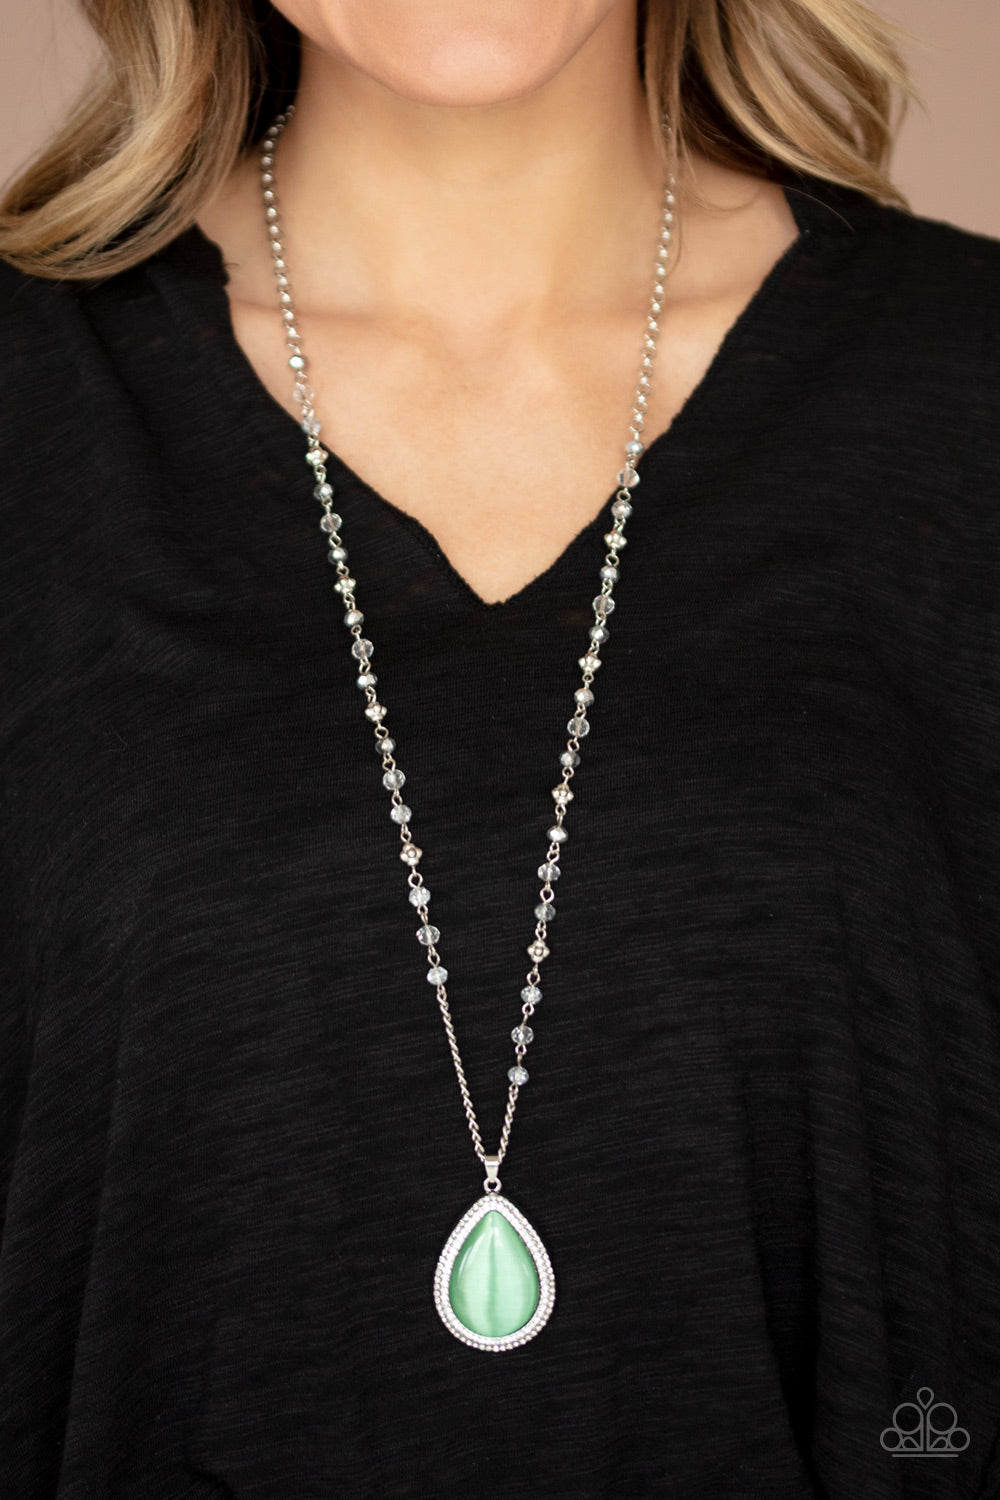 Paparazzi Fashion Flaunt Green Long Necklace - Life Of The Party July 2020 - P2RE-GRXX-211XX